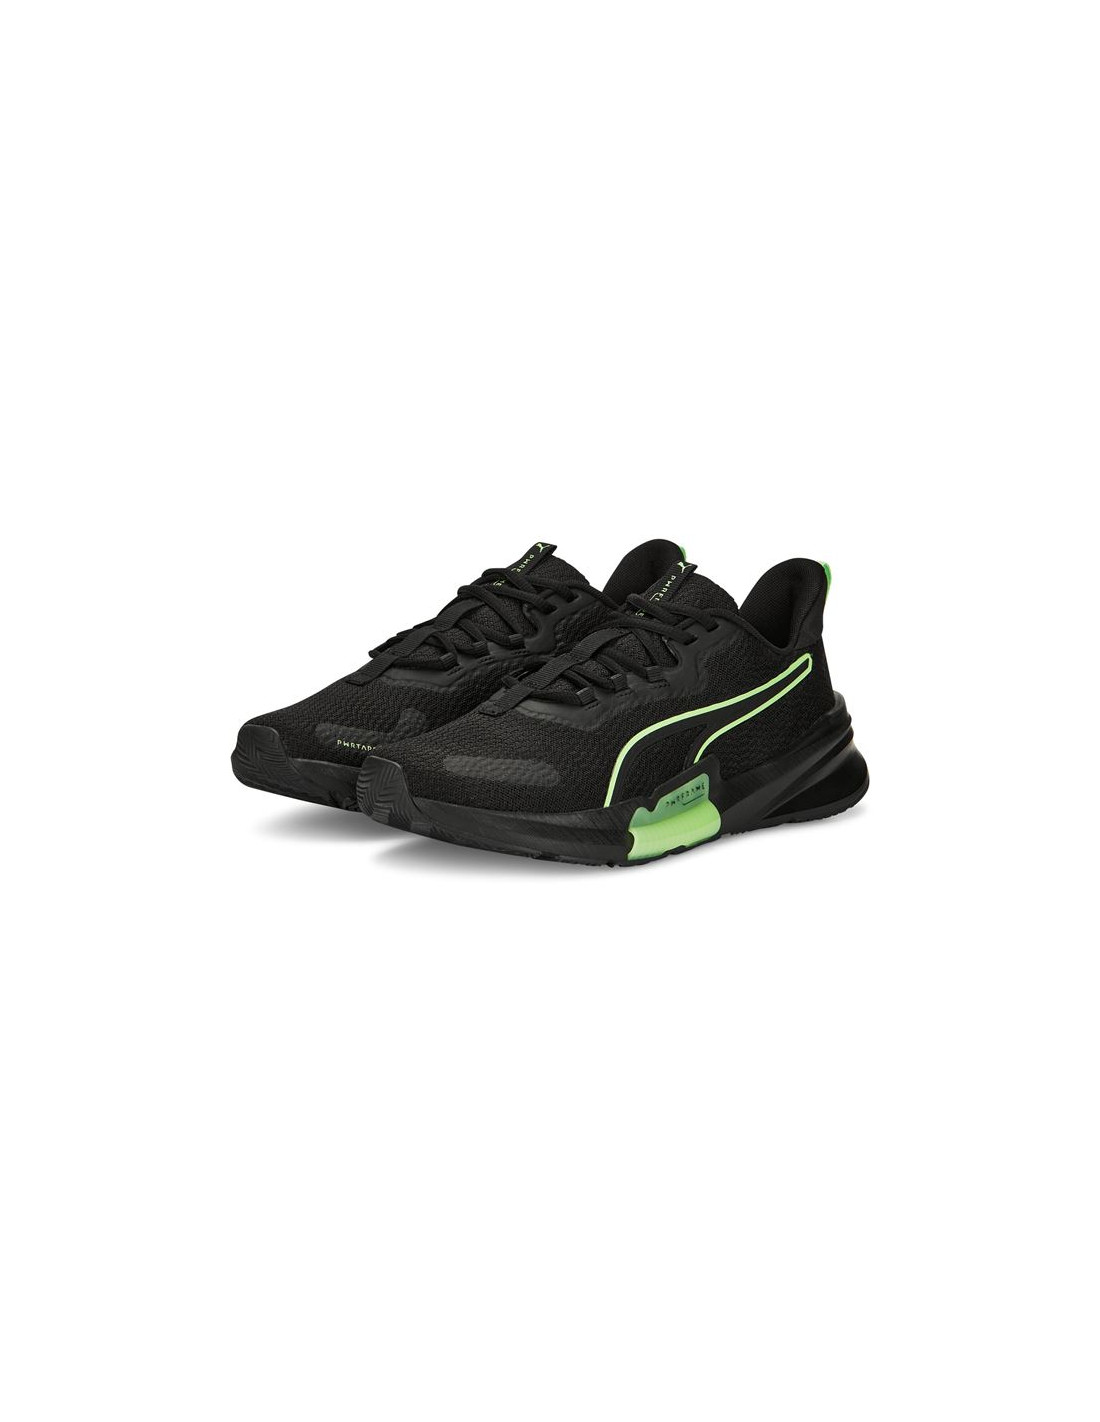 Chaussures de fitness et training PWRFrame TR 2 Homme